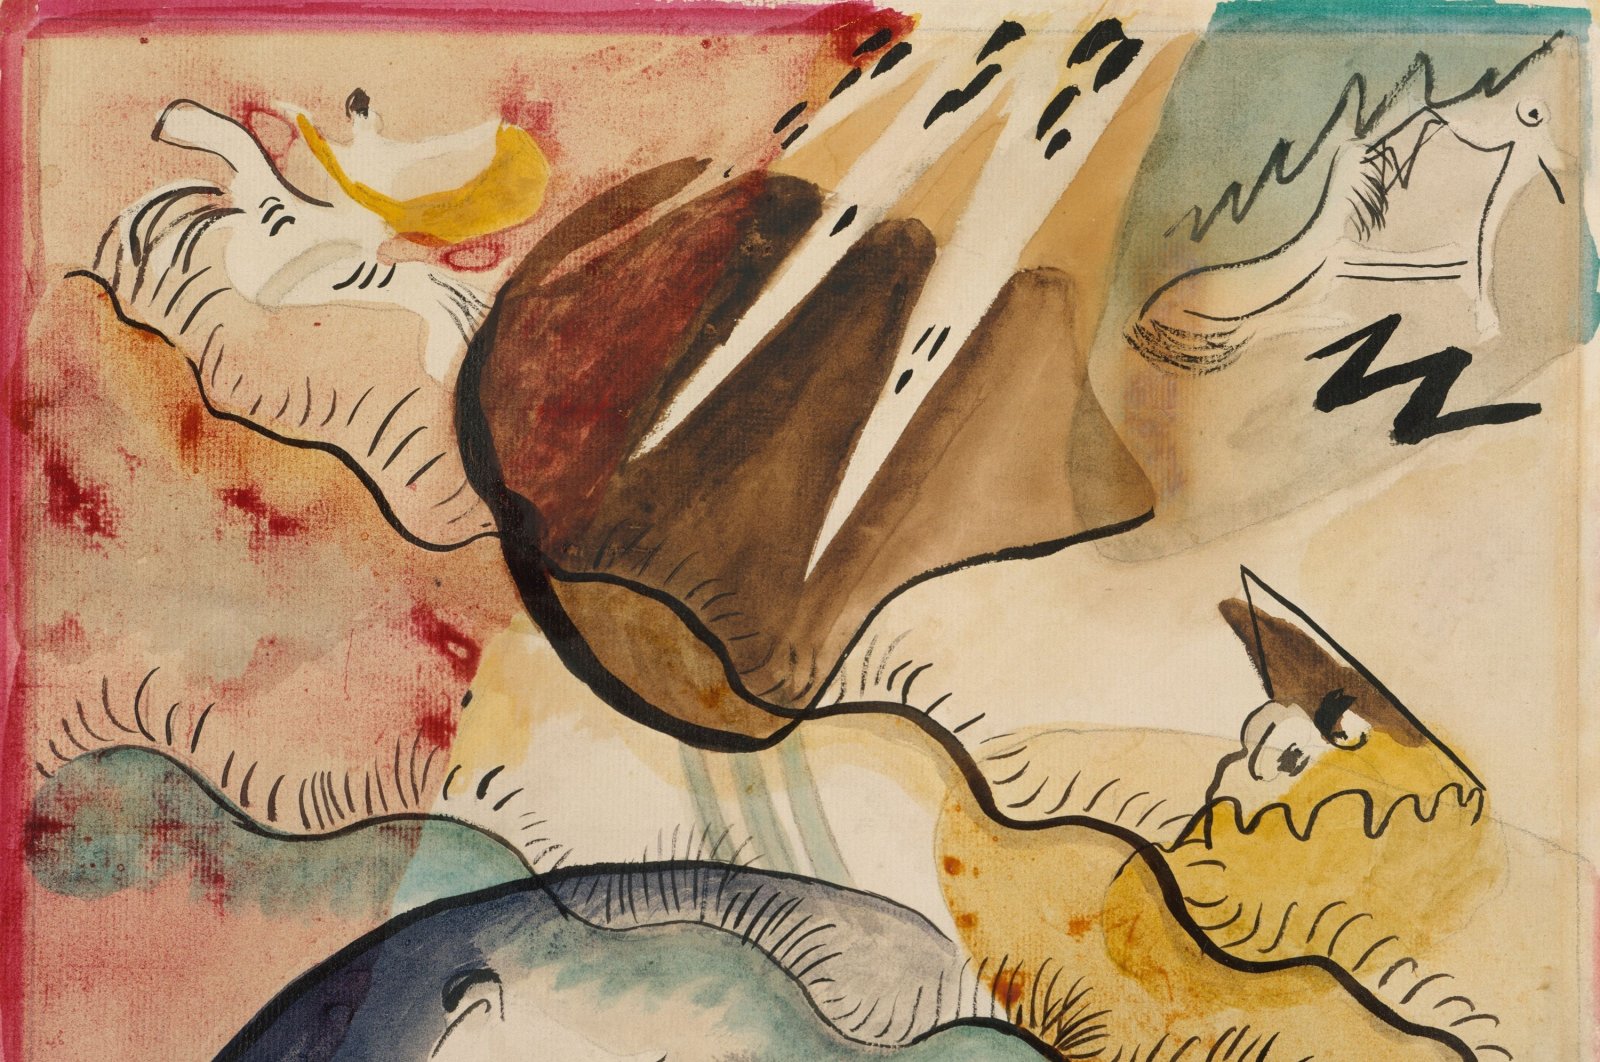 &quot;Rain Landscape&quot; by Wassily Kandinsky, 1911, Russian German Expressionist drawing, watercolor on paper. (Shutterstock Photo)